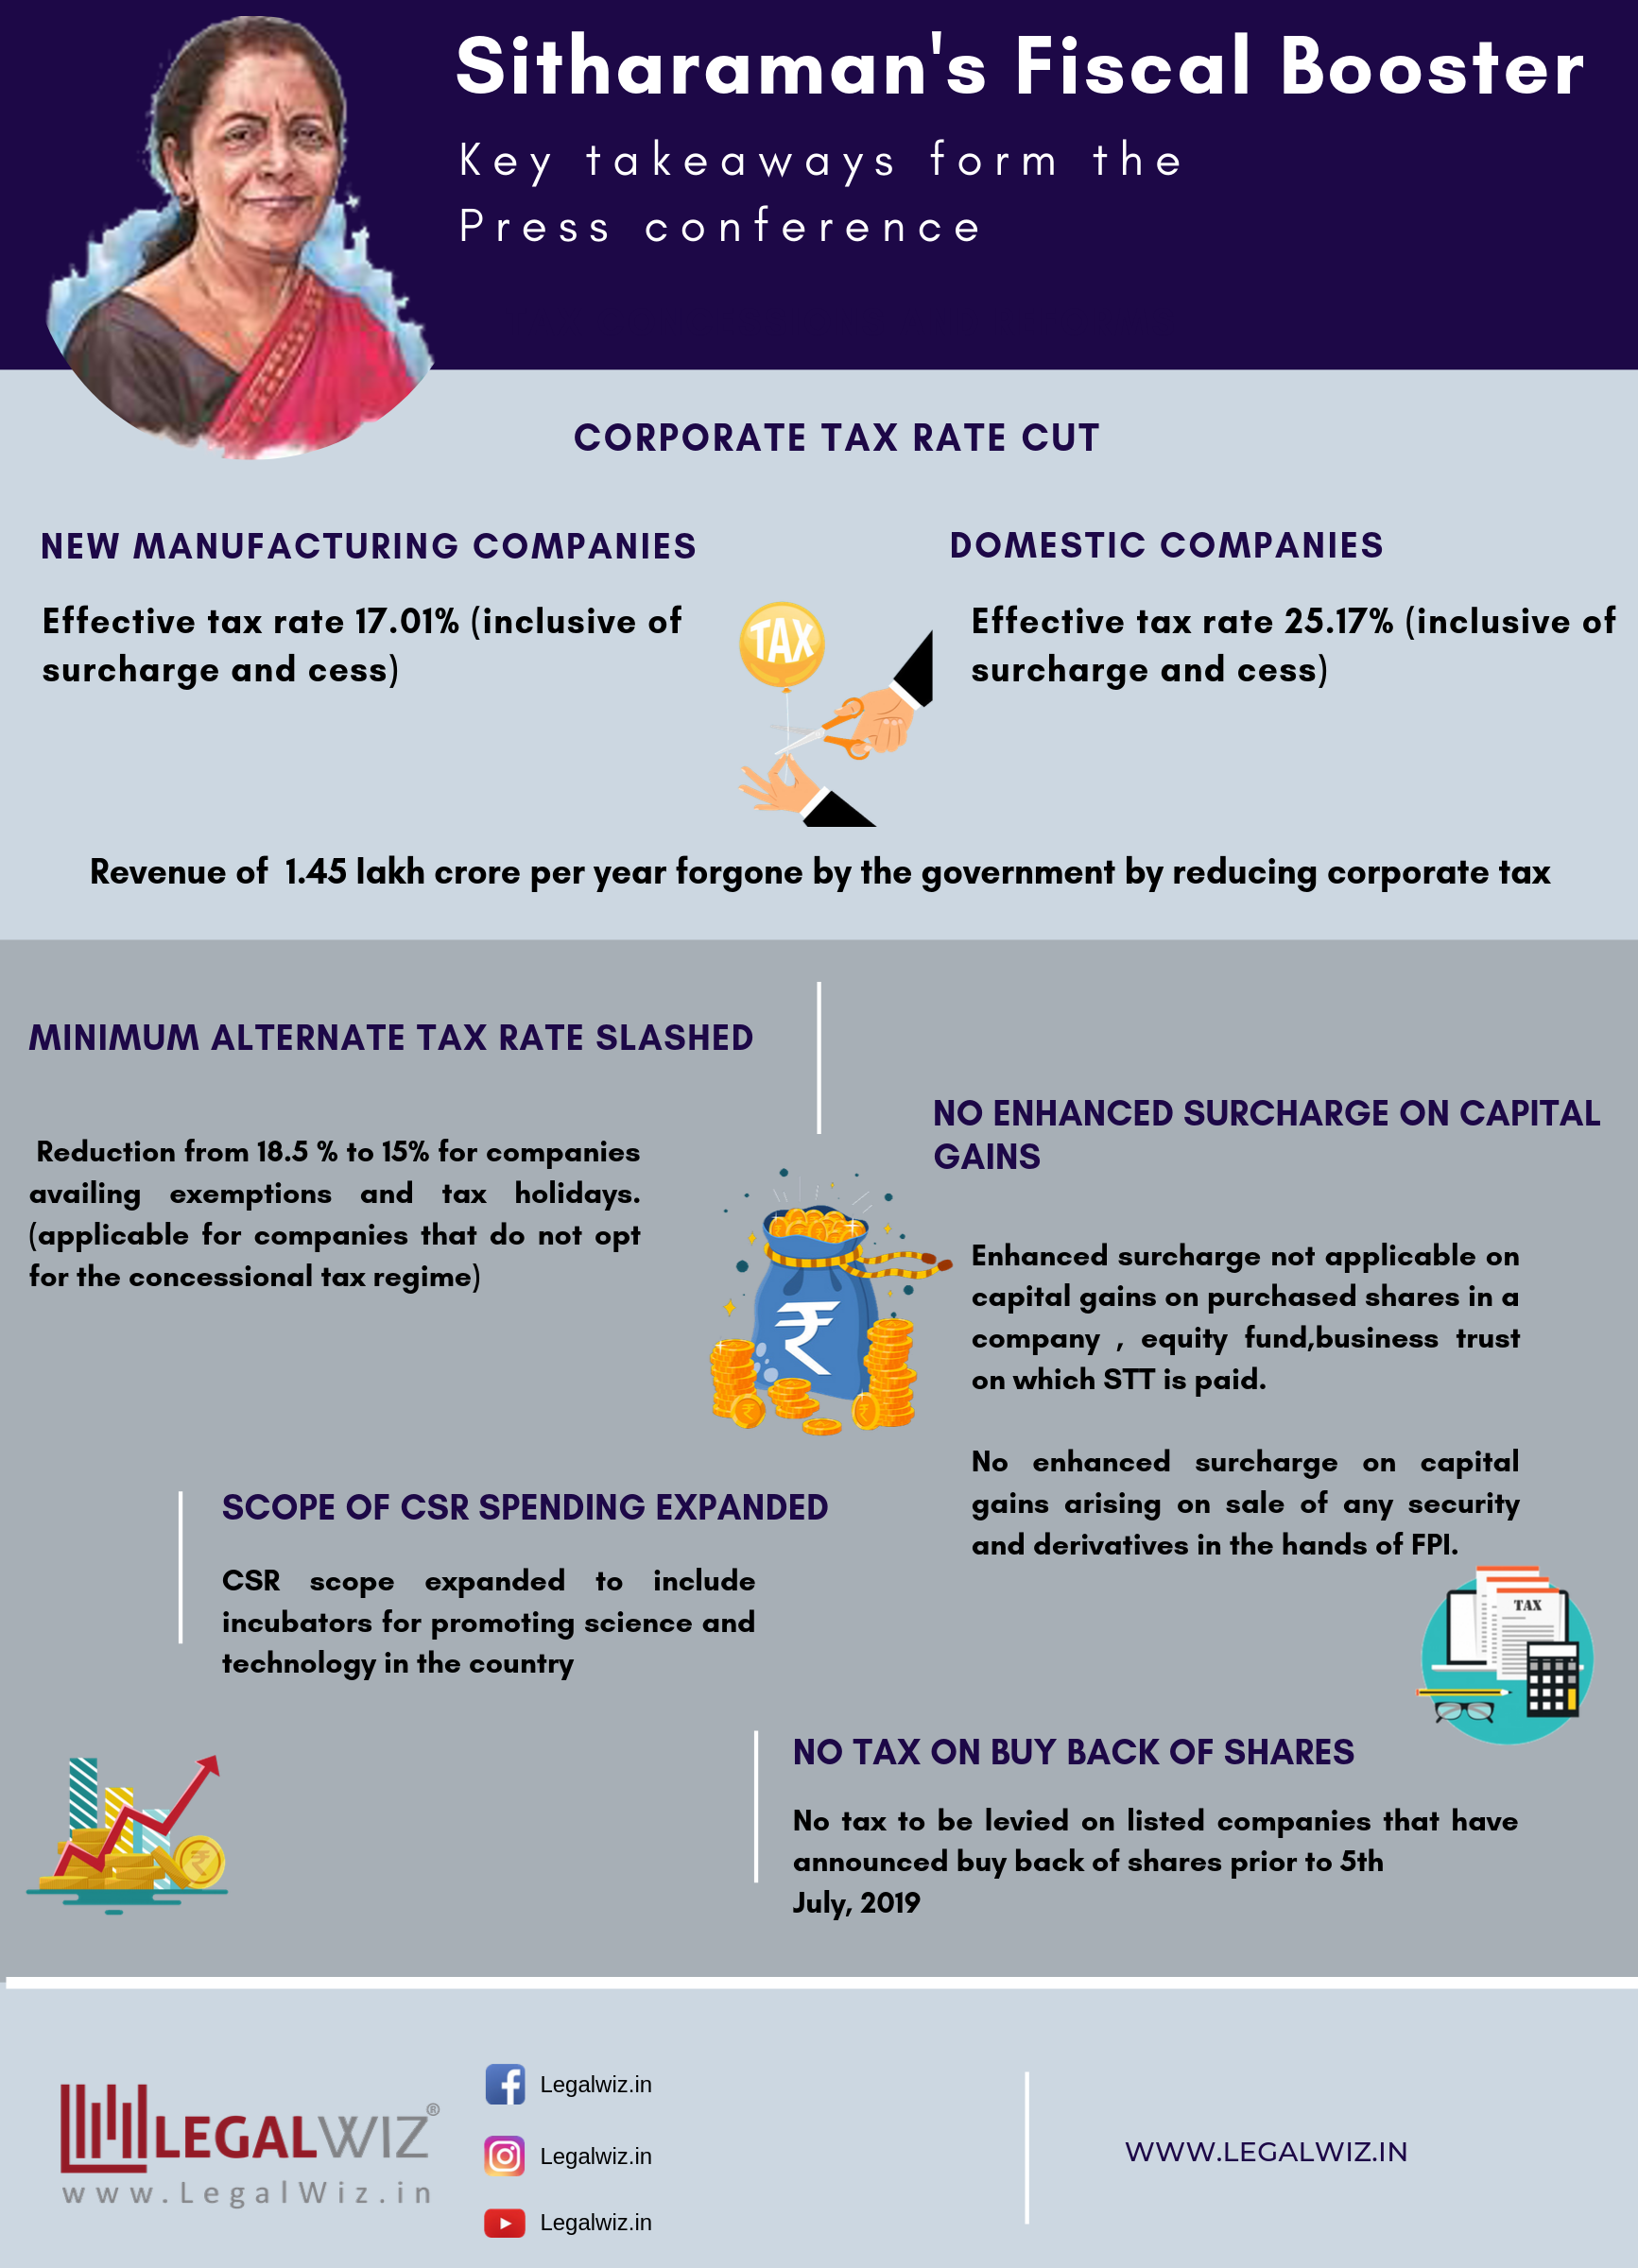 Latest tax updates and reforms introduced by the Finance Minister Nirmala Sitharaman